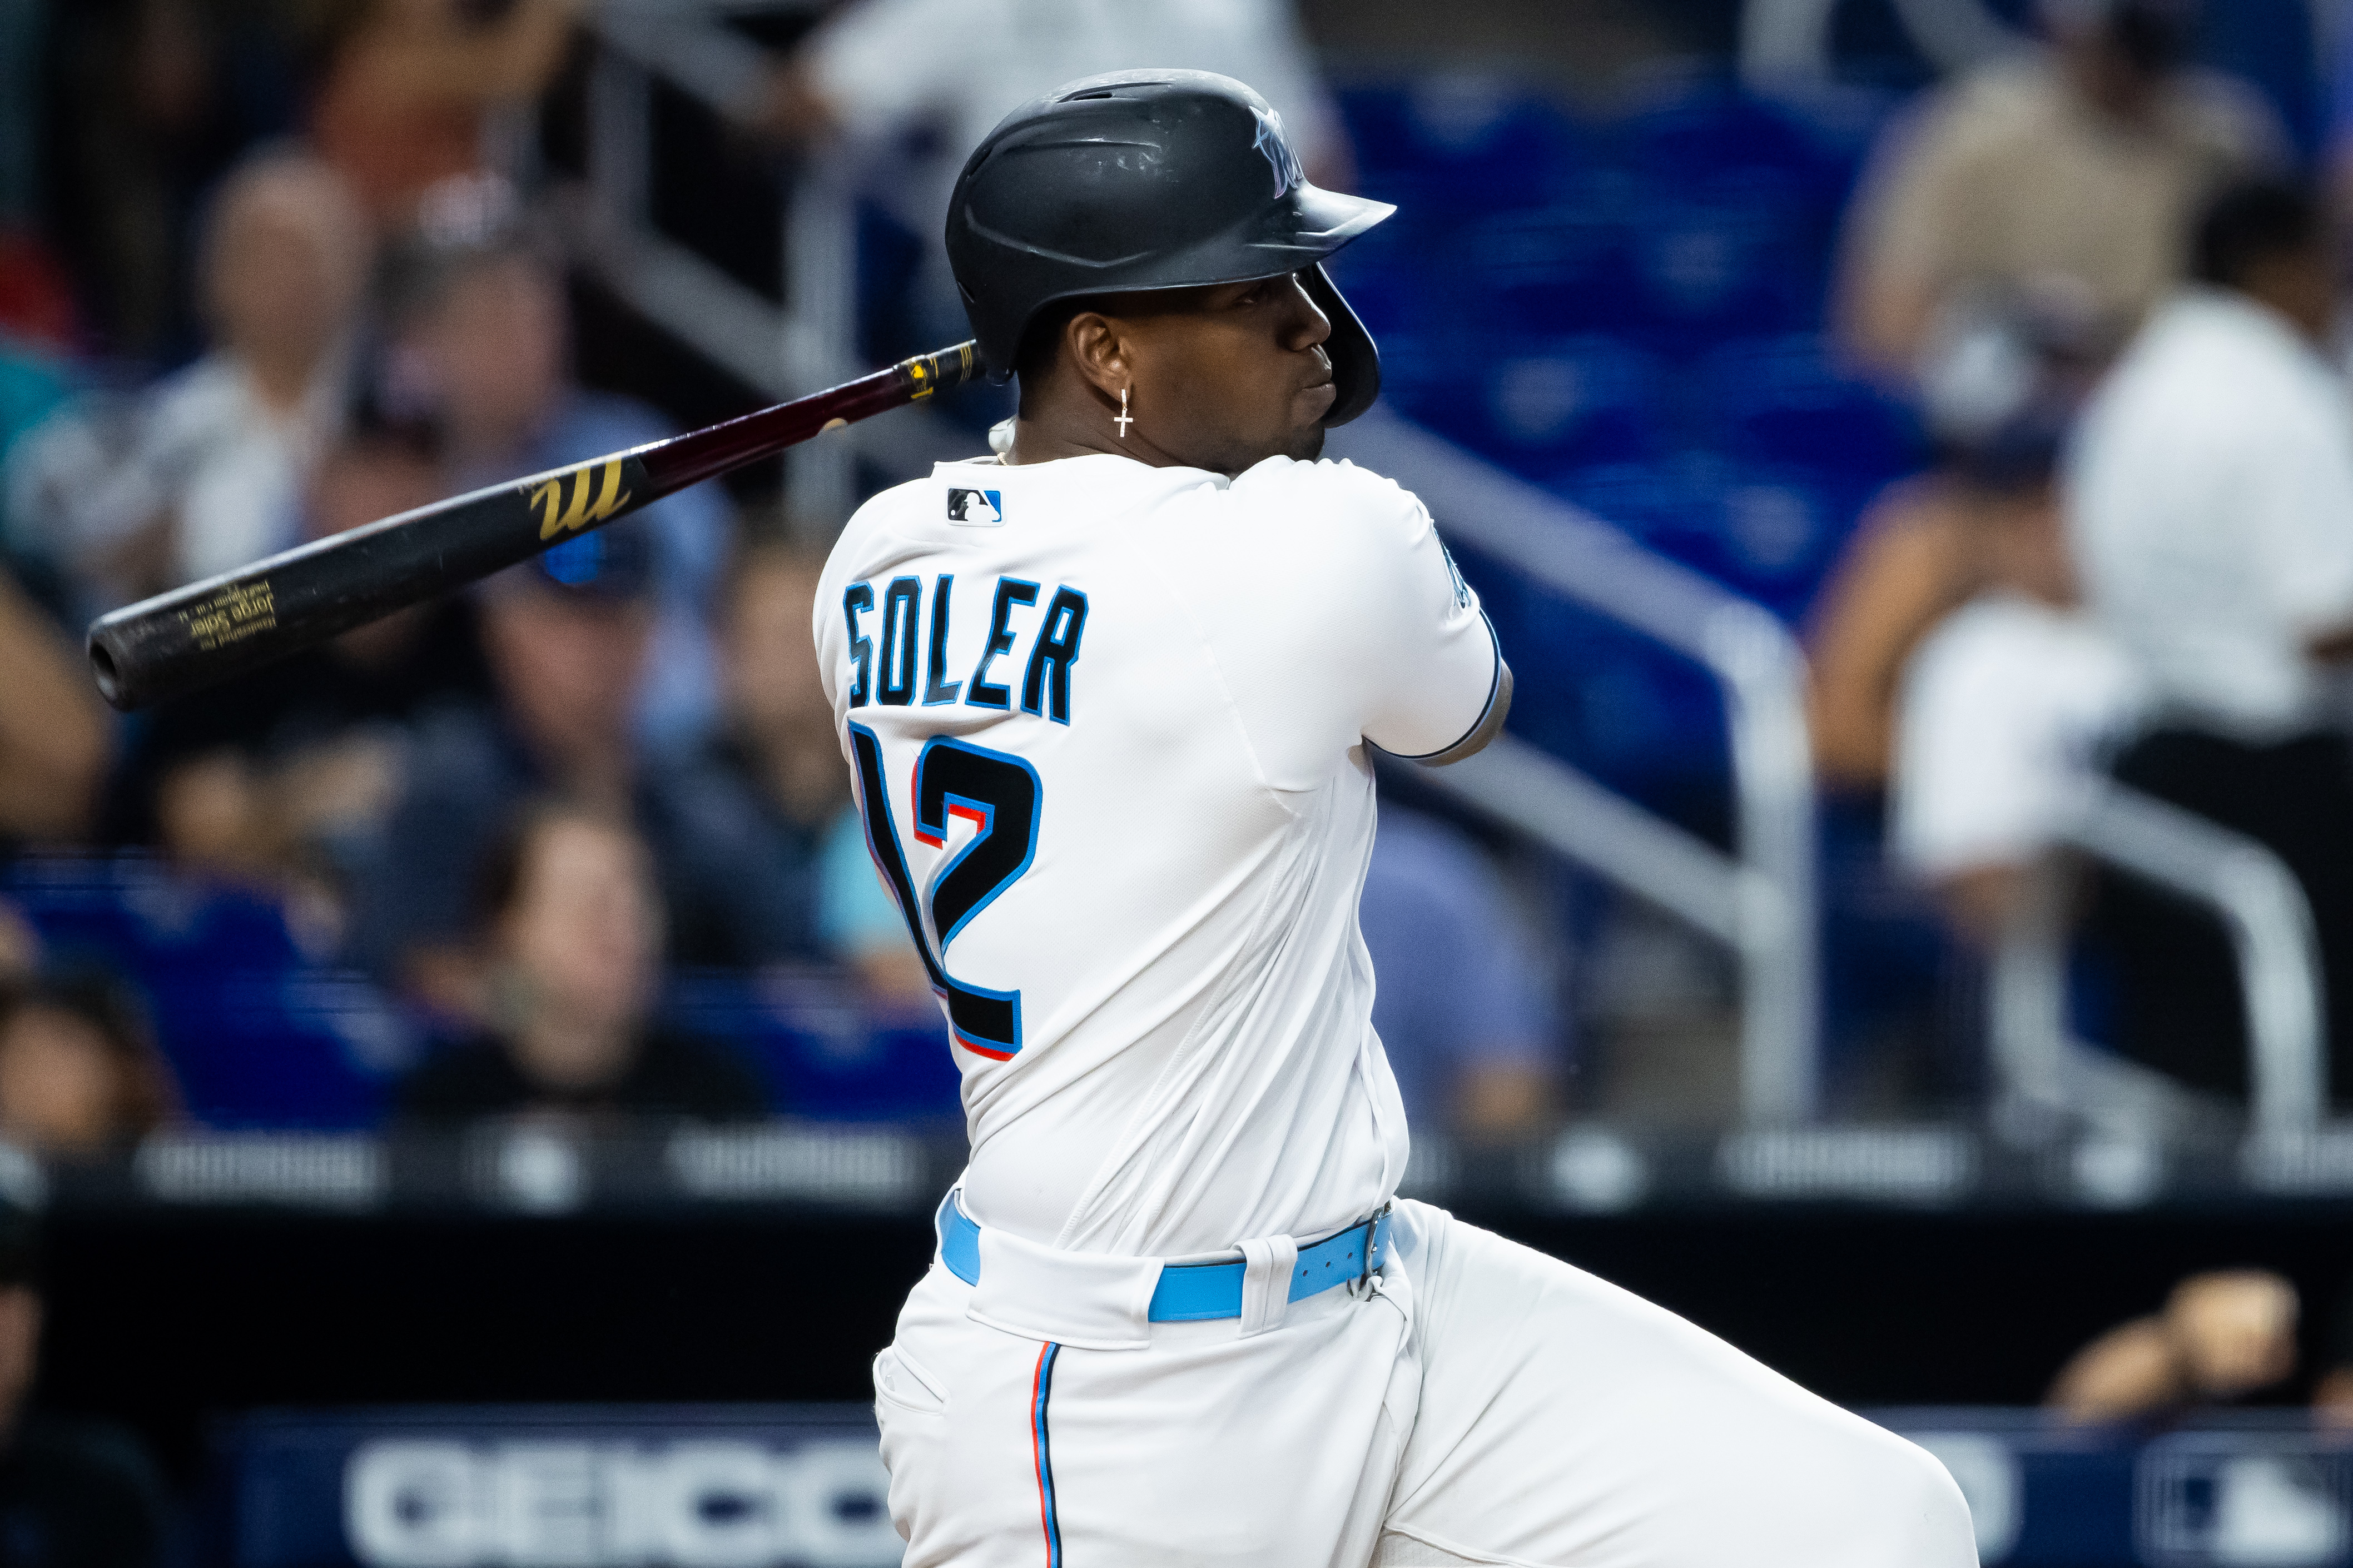 Jorge Soler of the Miami Marlins singles in the third inning during the game between the Atlanta Braves and the Miami Marlins at loanDepot park on Sunday, September 17, 2023 in Miami, Florida.